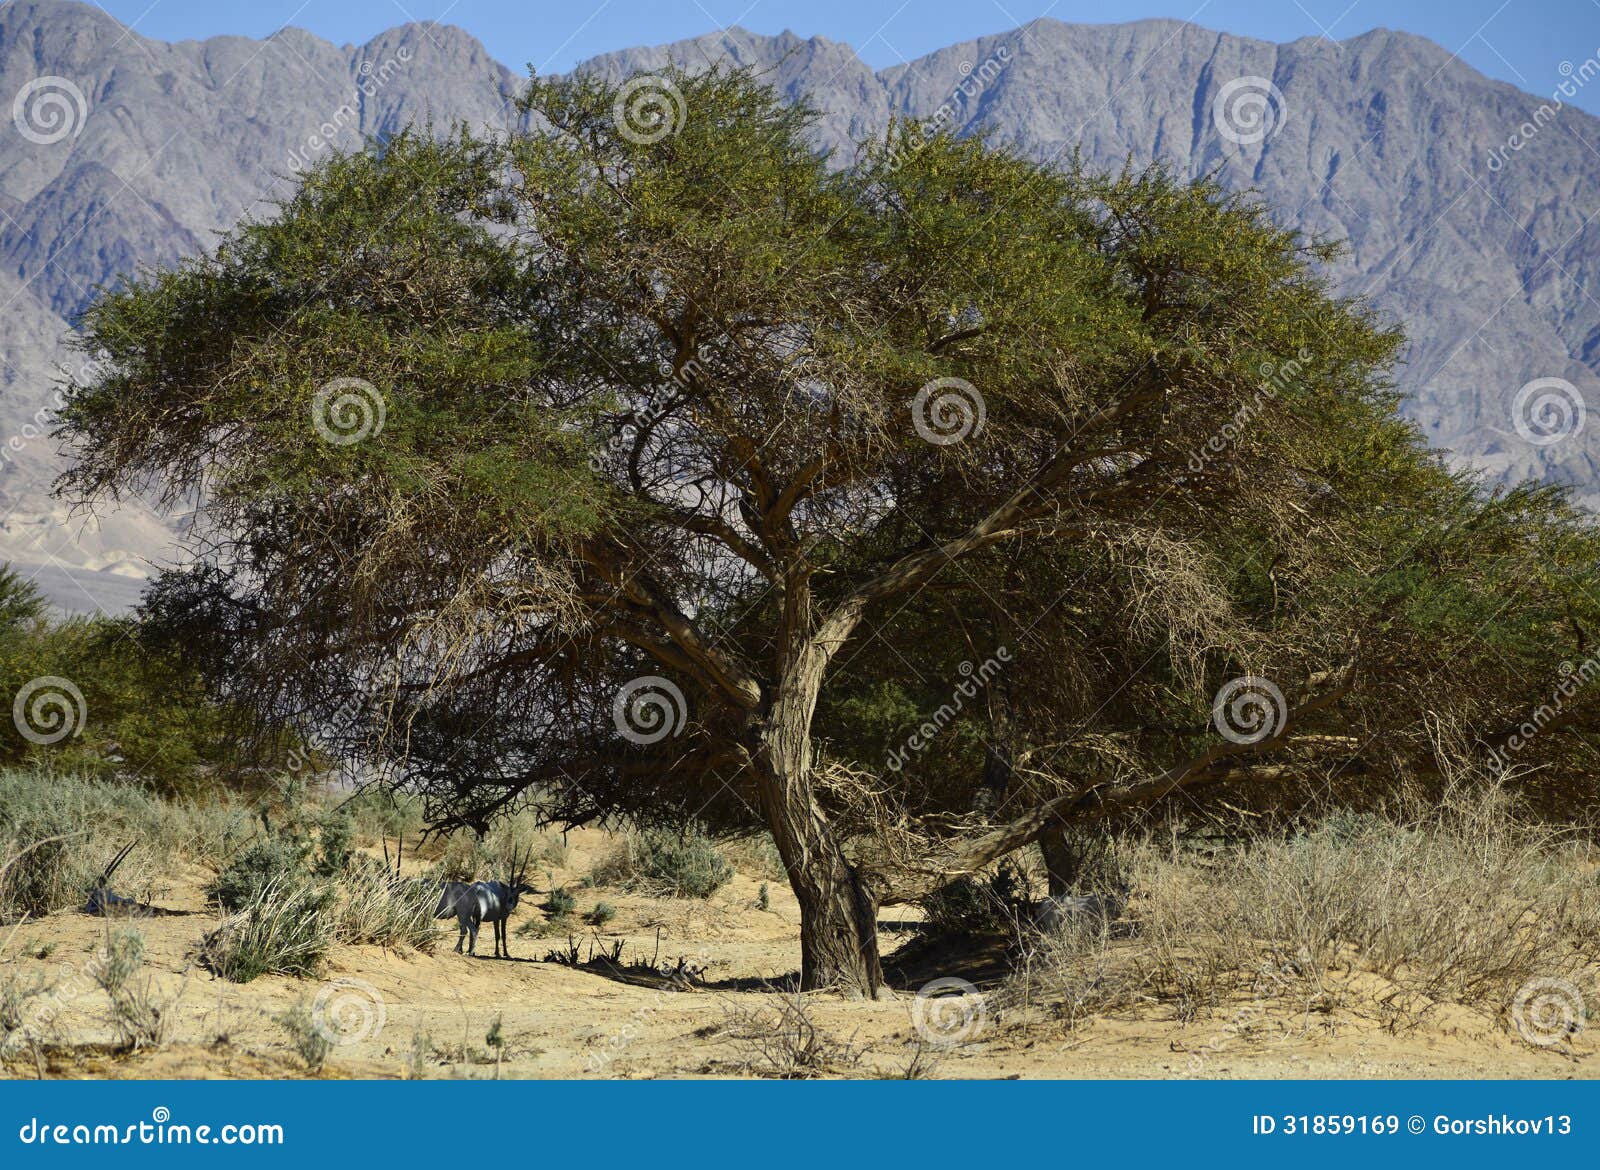 Acacia Tree In Nature Reserve Near Eilat, Israel Stock Image - Image: 31859169